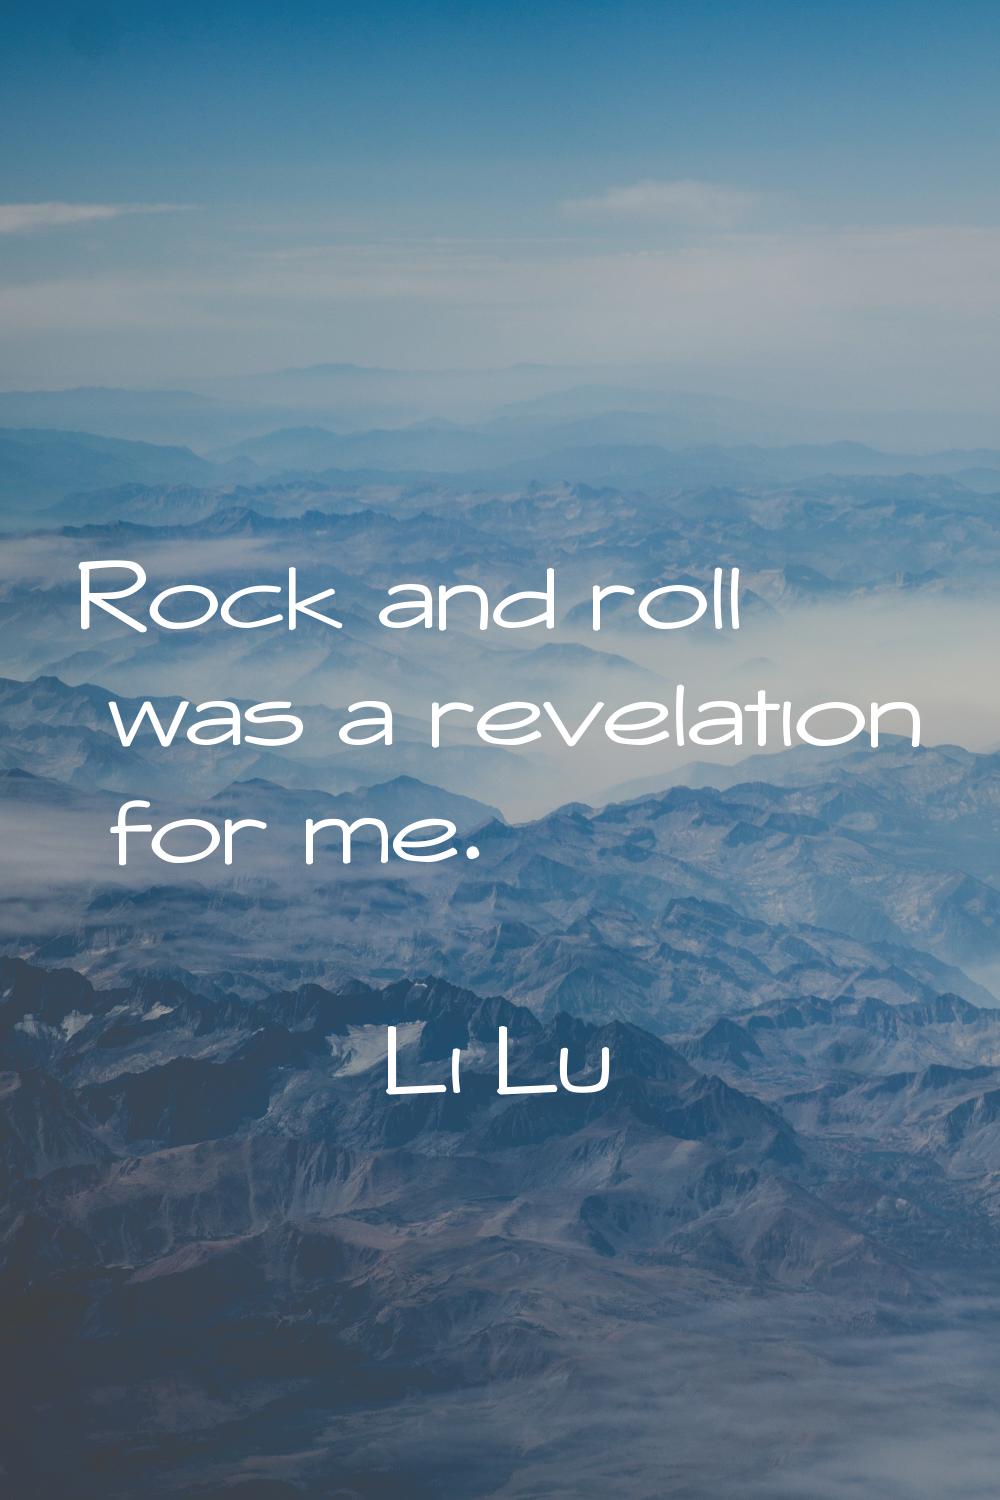 Rock and roll was a revelation for me.